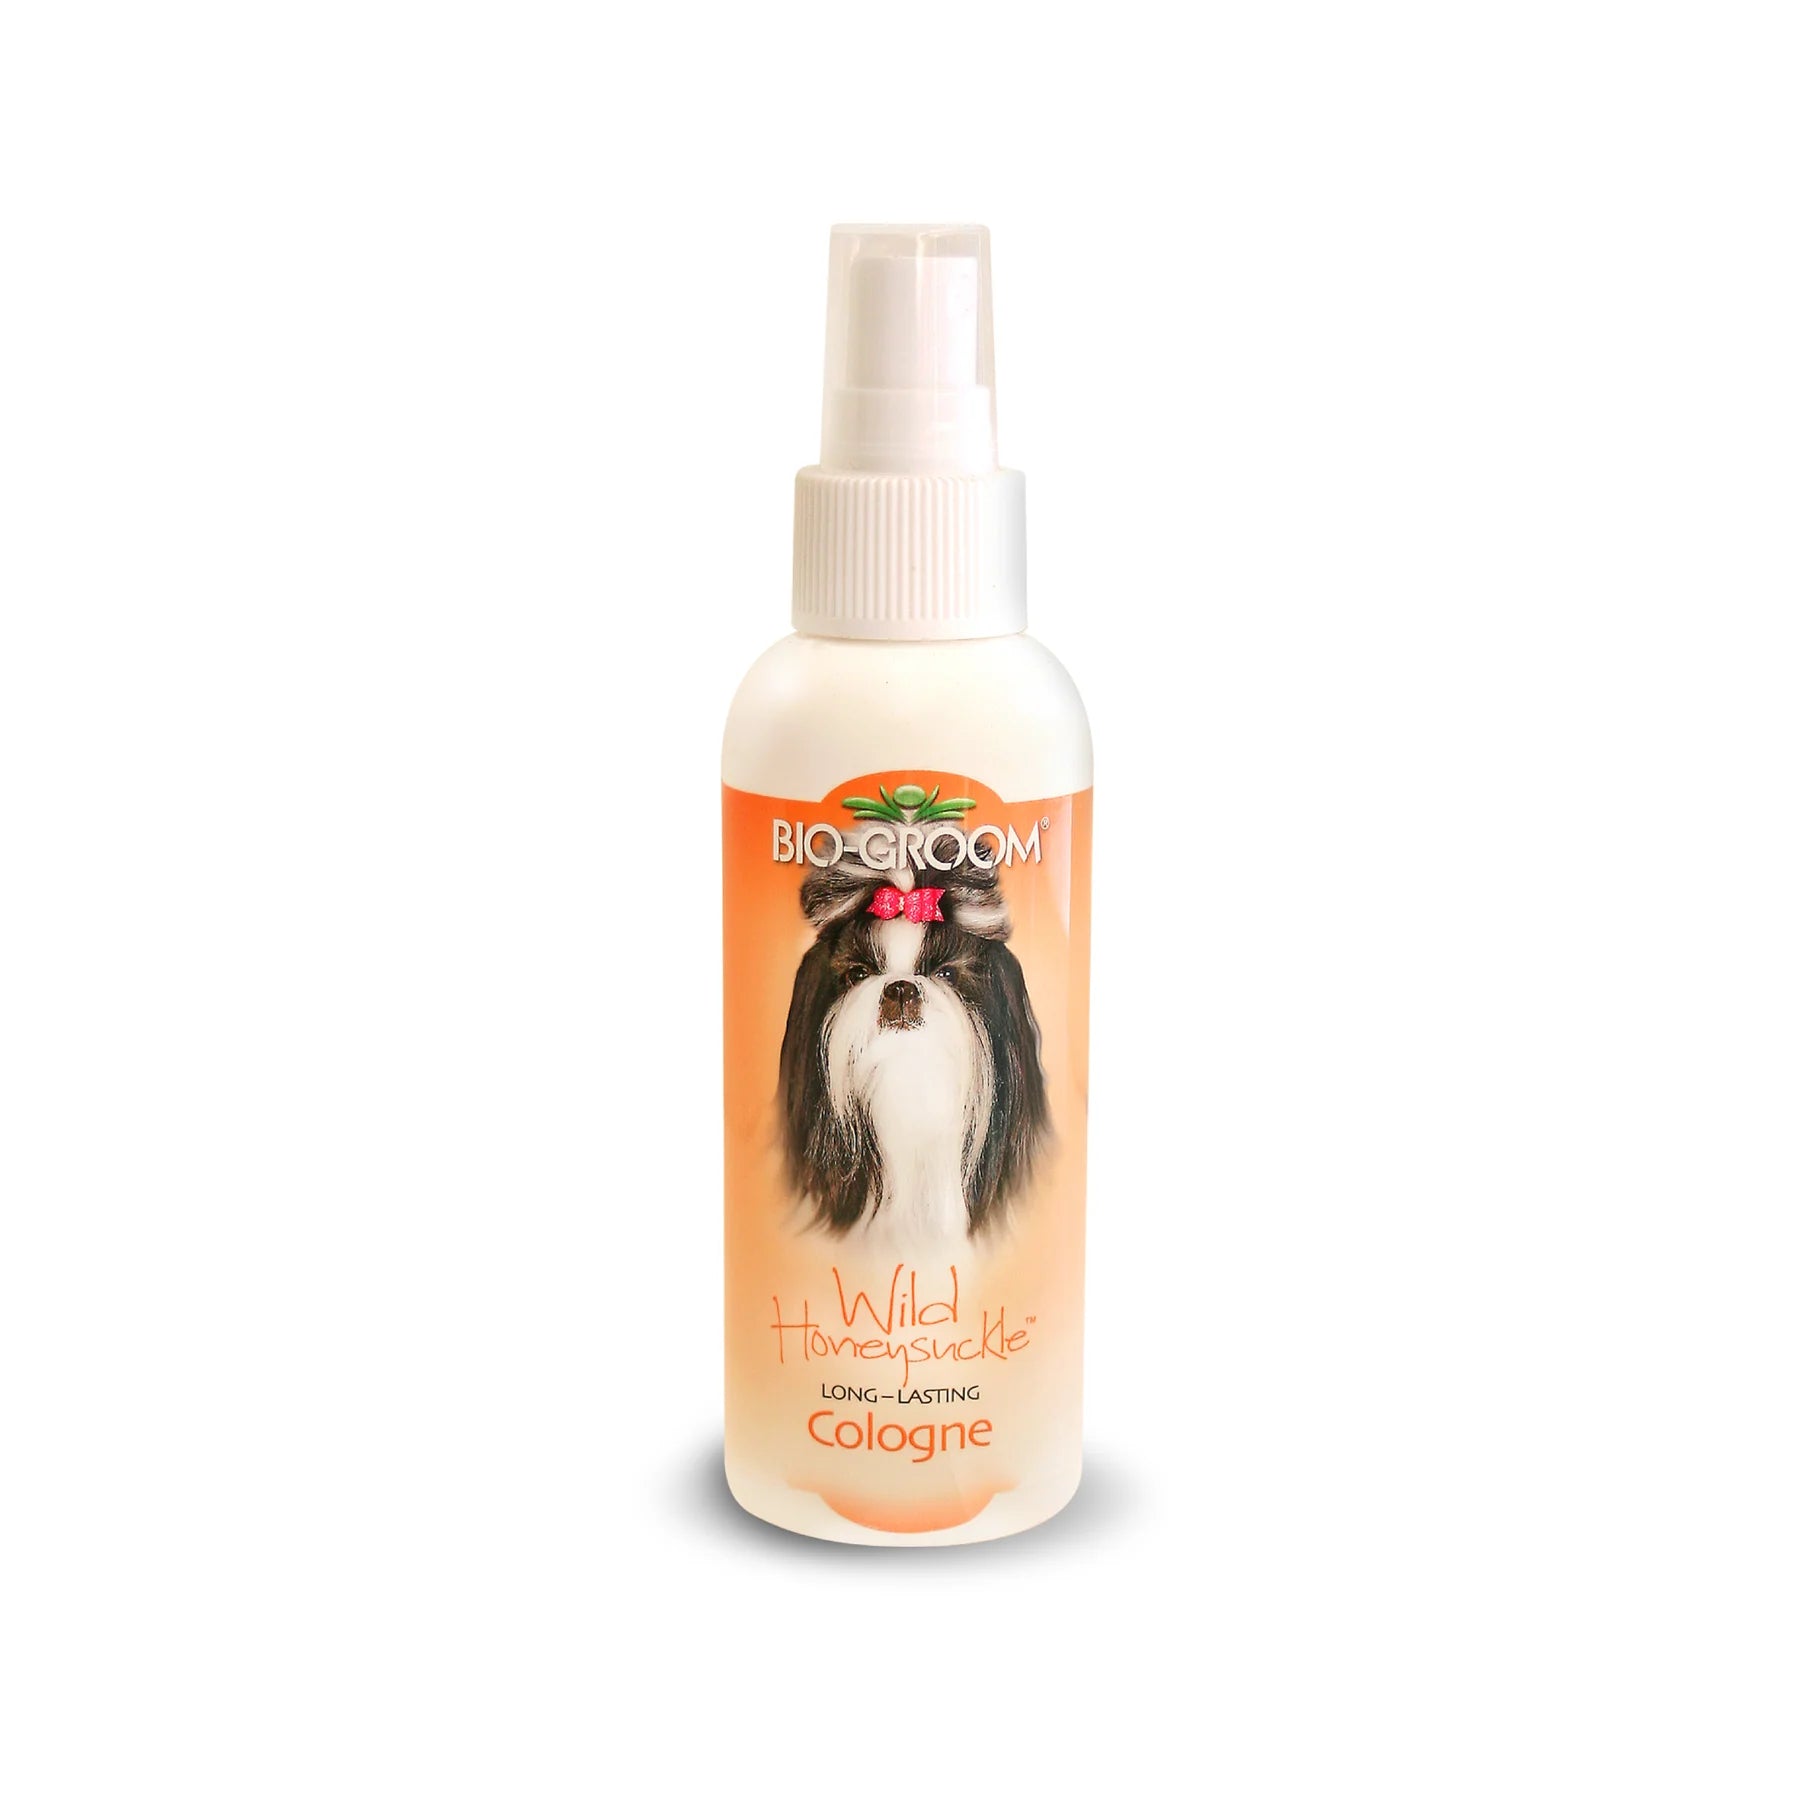 Biogroom Wild Honeysuckle fragrance infused cologne for dogs and cat, 118 ml